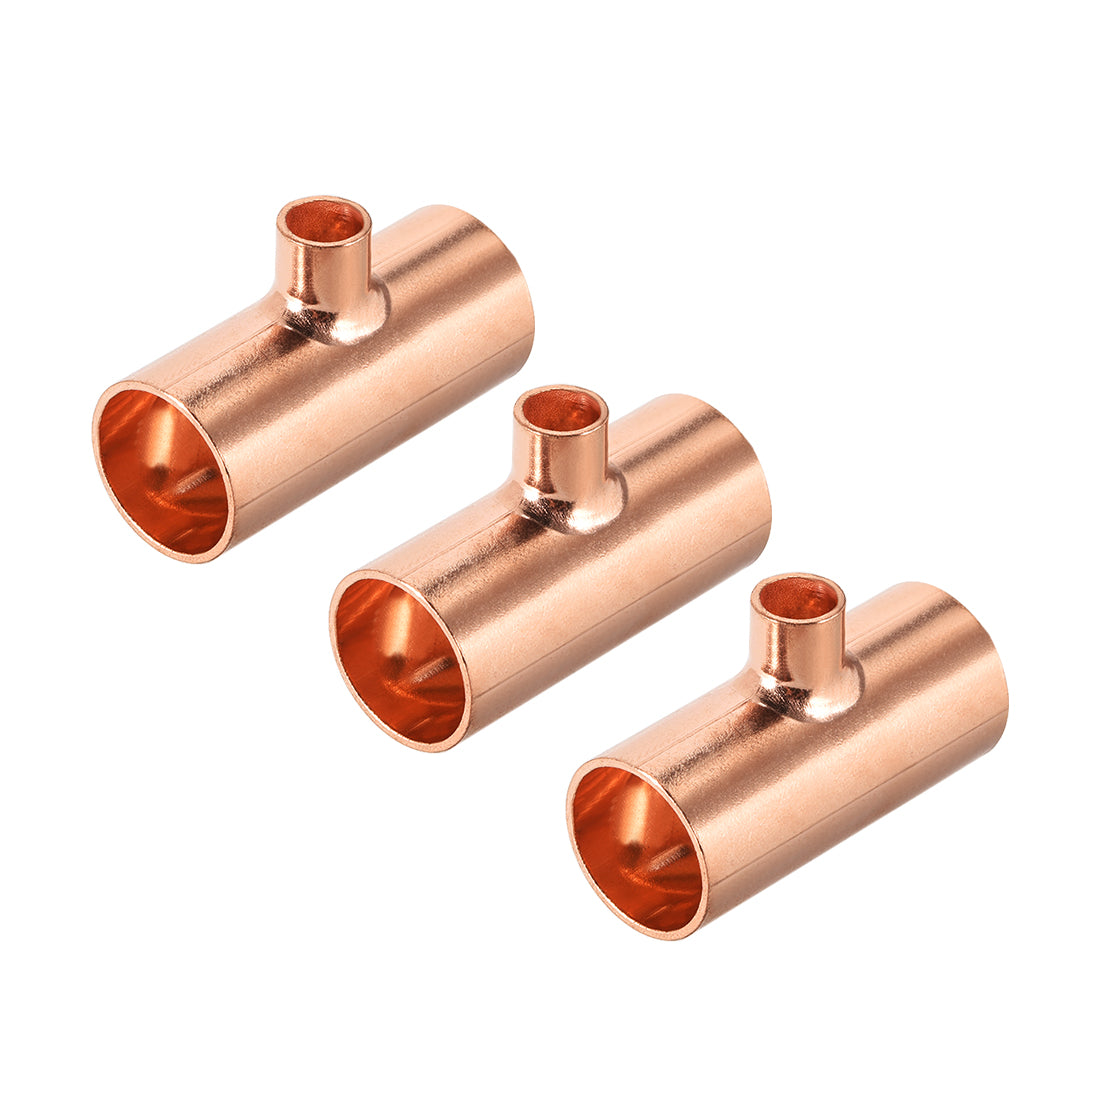 uxcell Uxcell 5/8-inch x 1/4-inch x 5/8-inch Copper Reducing Tee Copper Pressure Pipe Fitting Conector  for Plumbing Supply and Refrigeration 3pcs